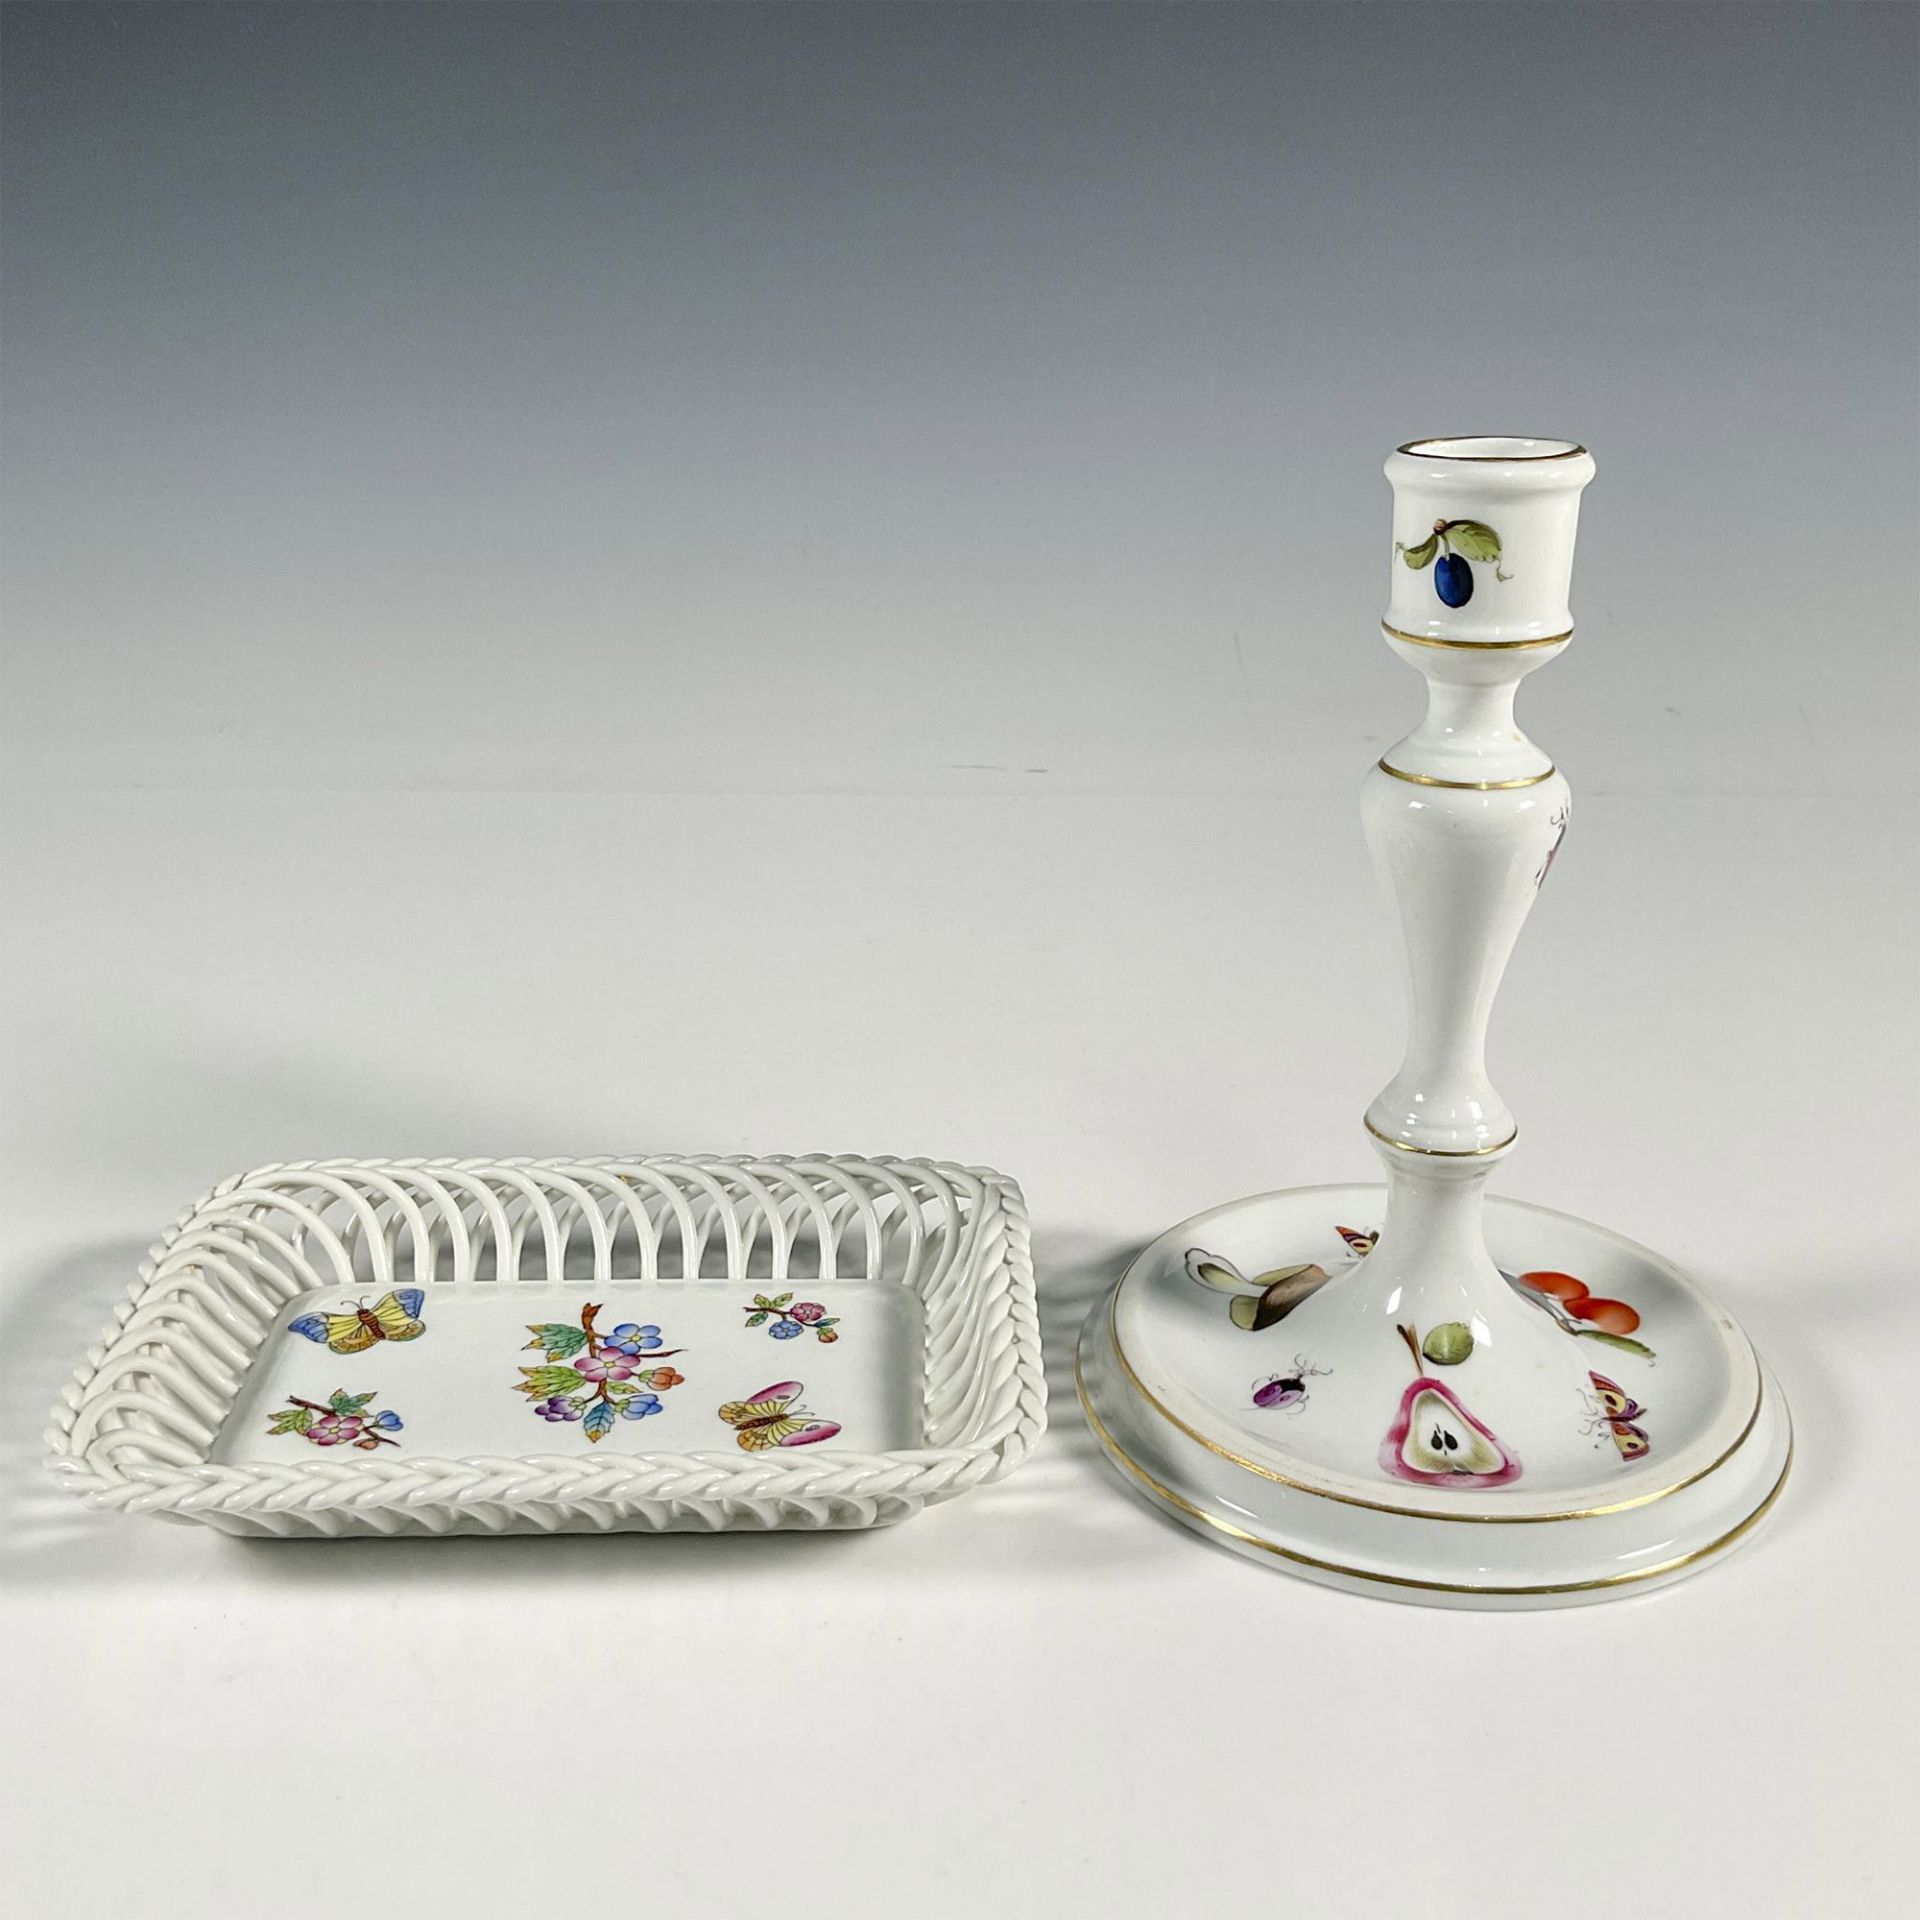 2pc Herend Porcelain Tray and Candlestick Holder